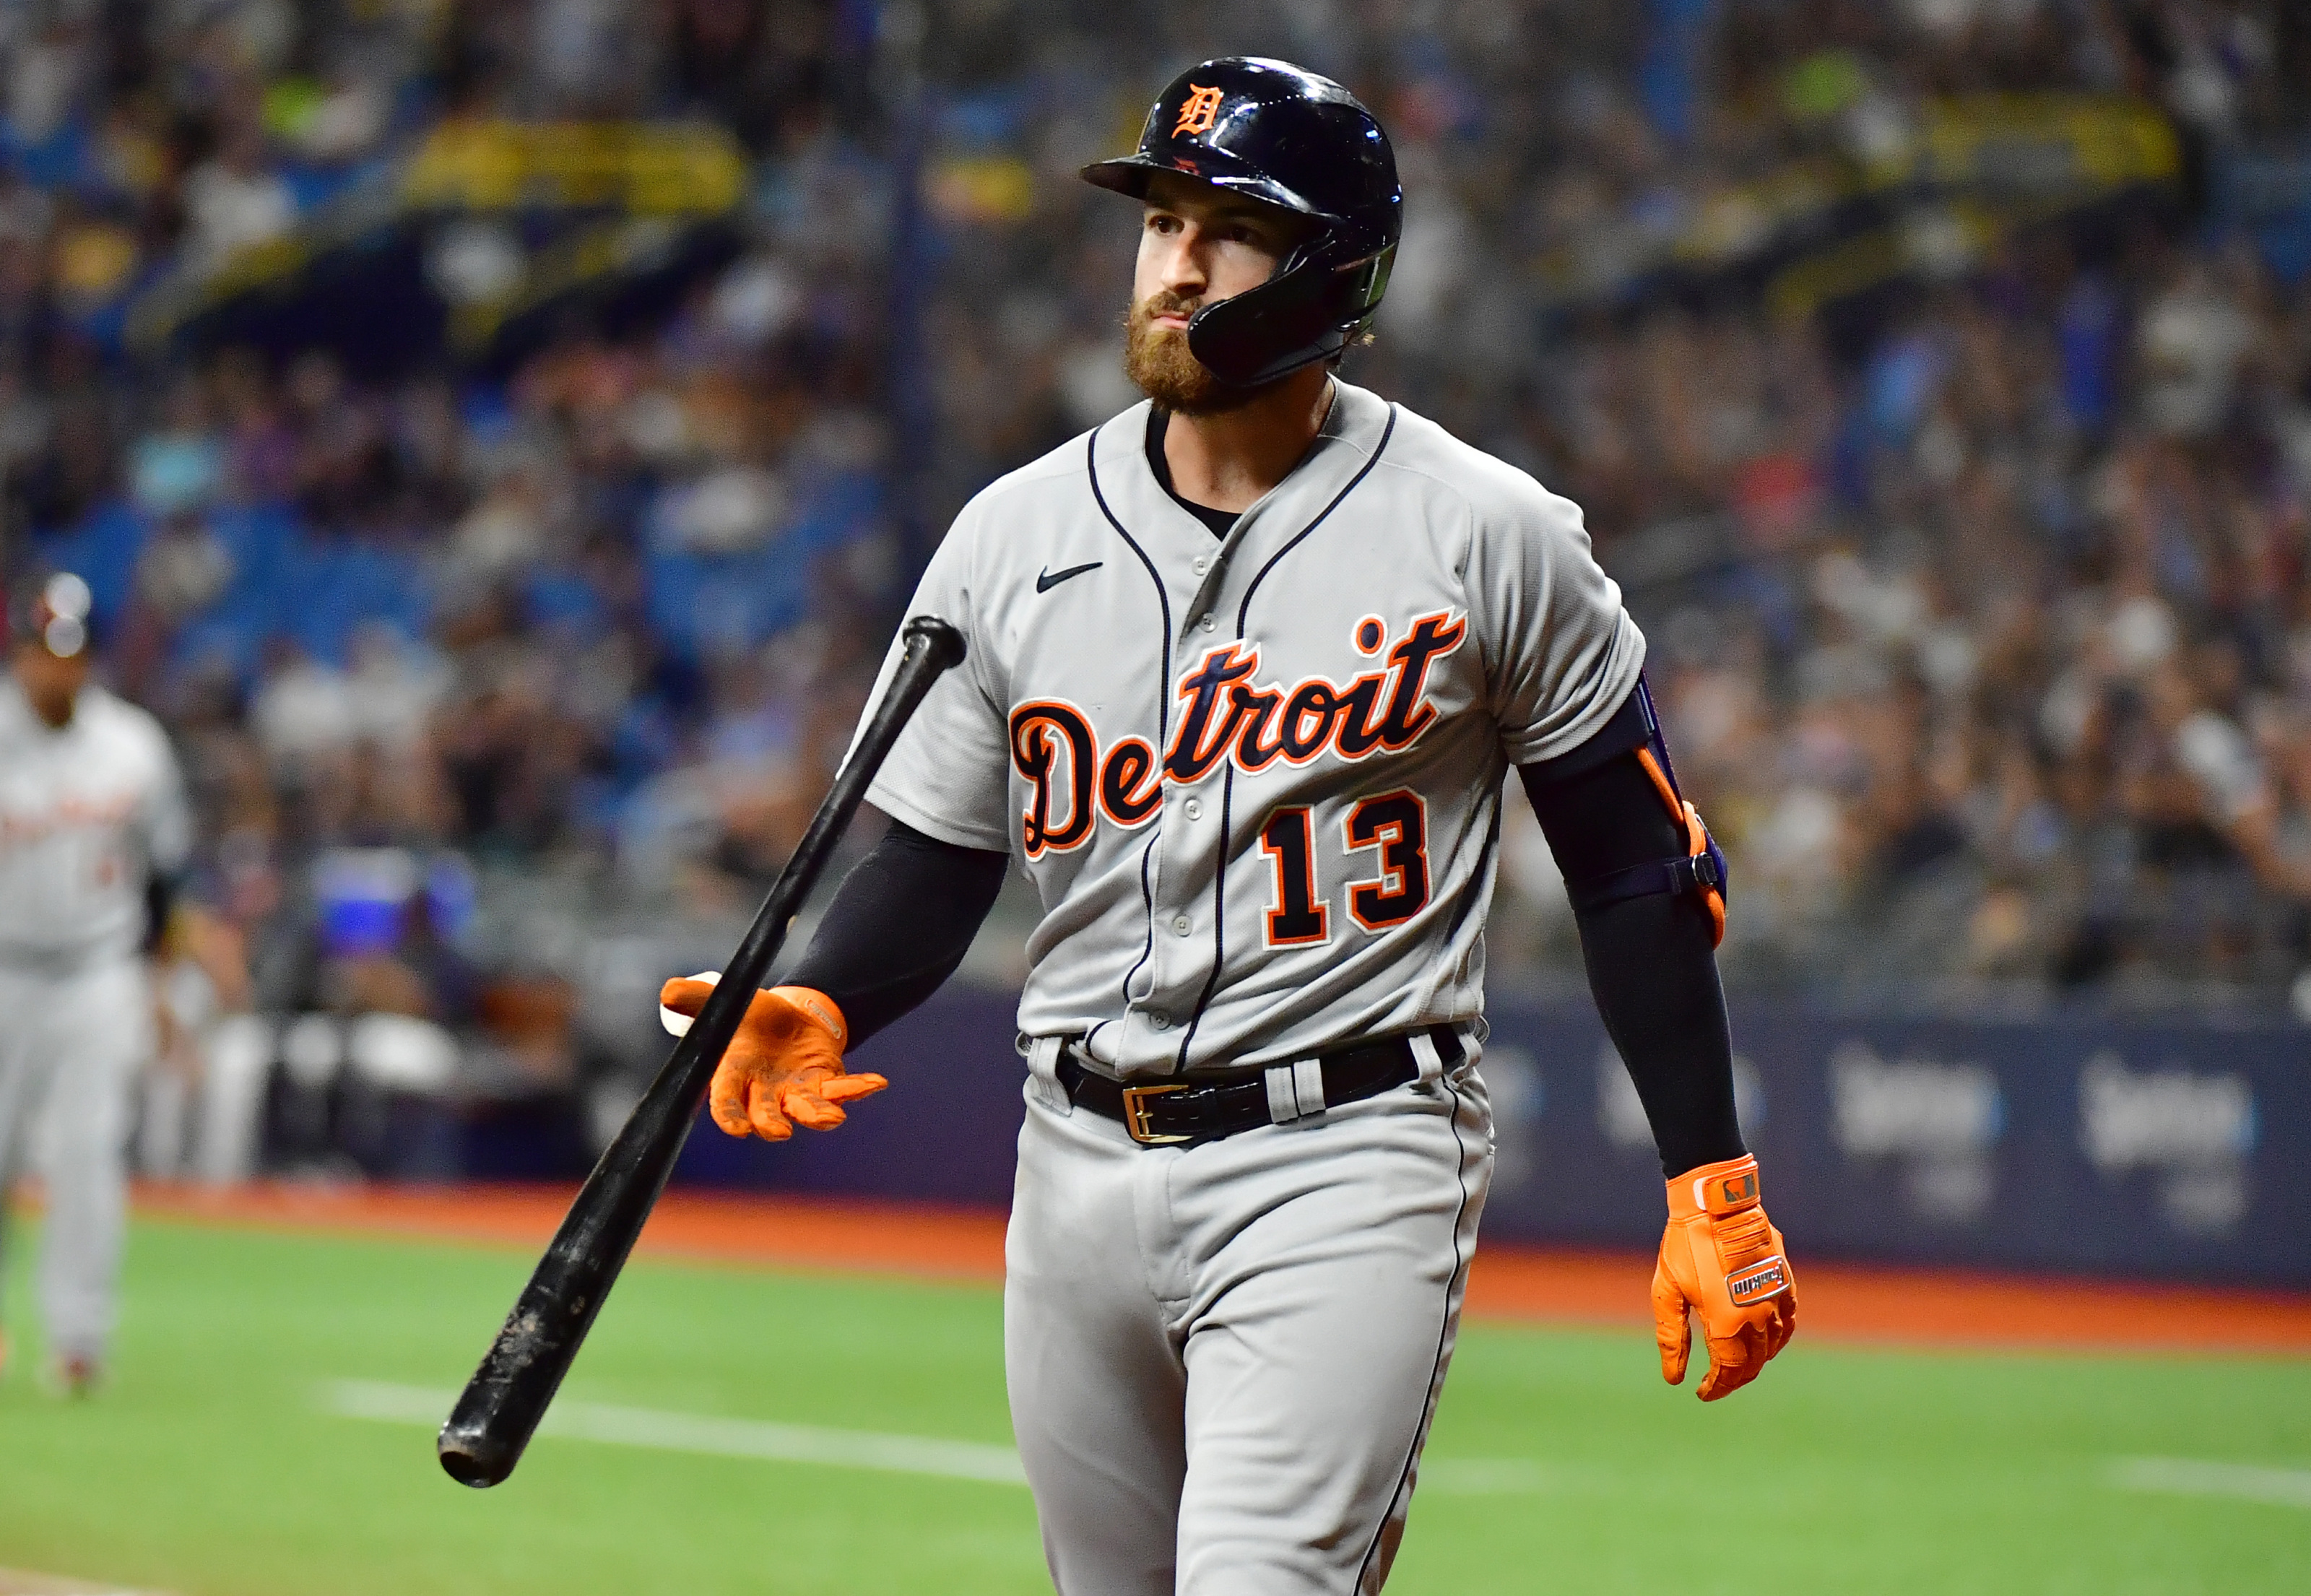 Detroit Tigers: Eric Haase's positional versatility likely to pay